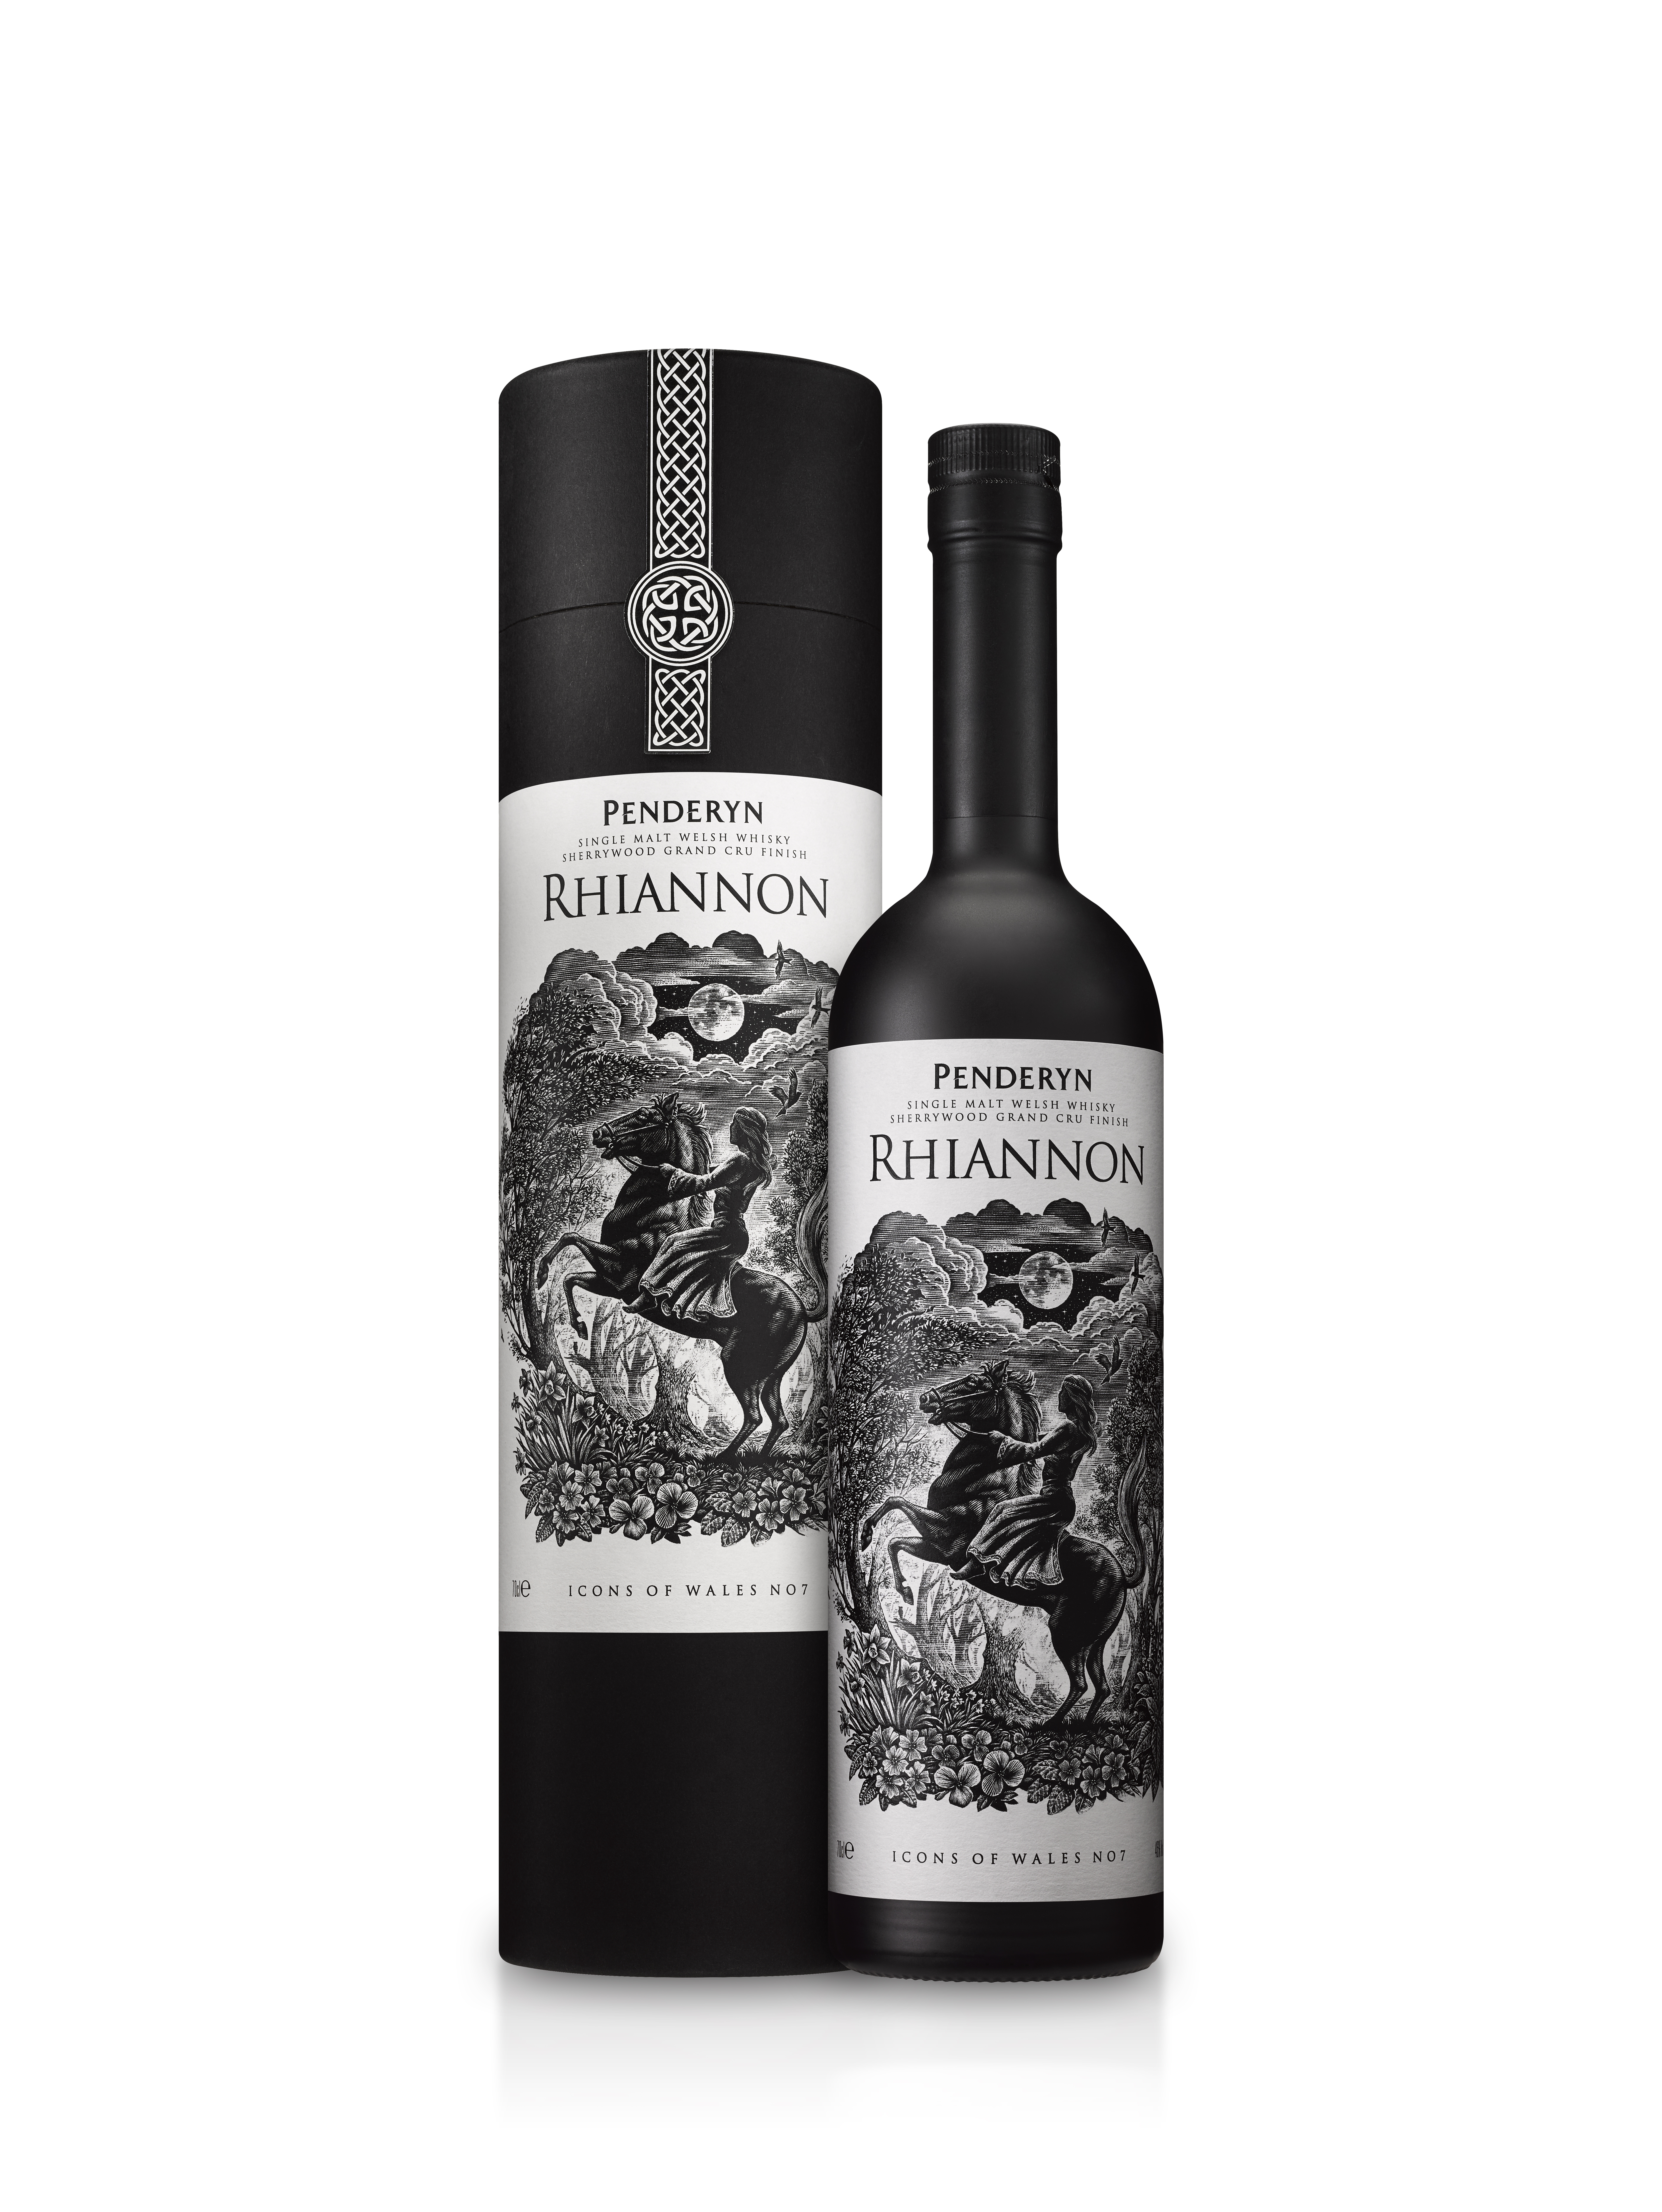 Penderyn Icons of Wales No. 7 – Rhiannon has arrived!